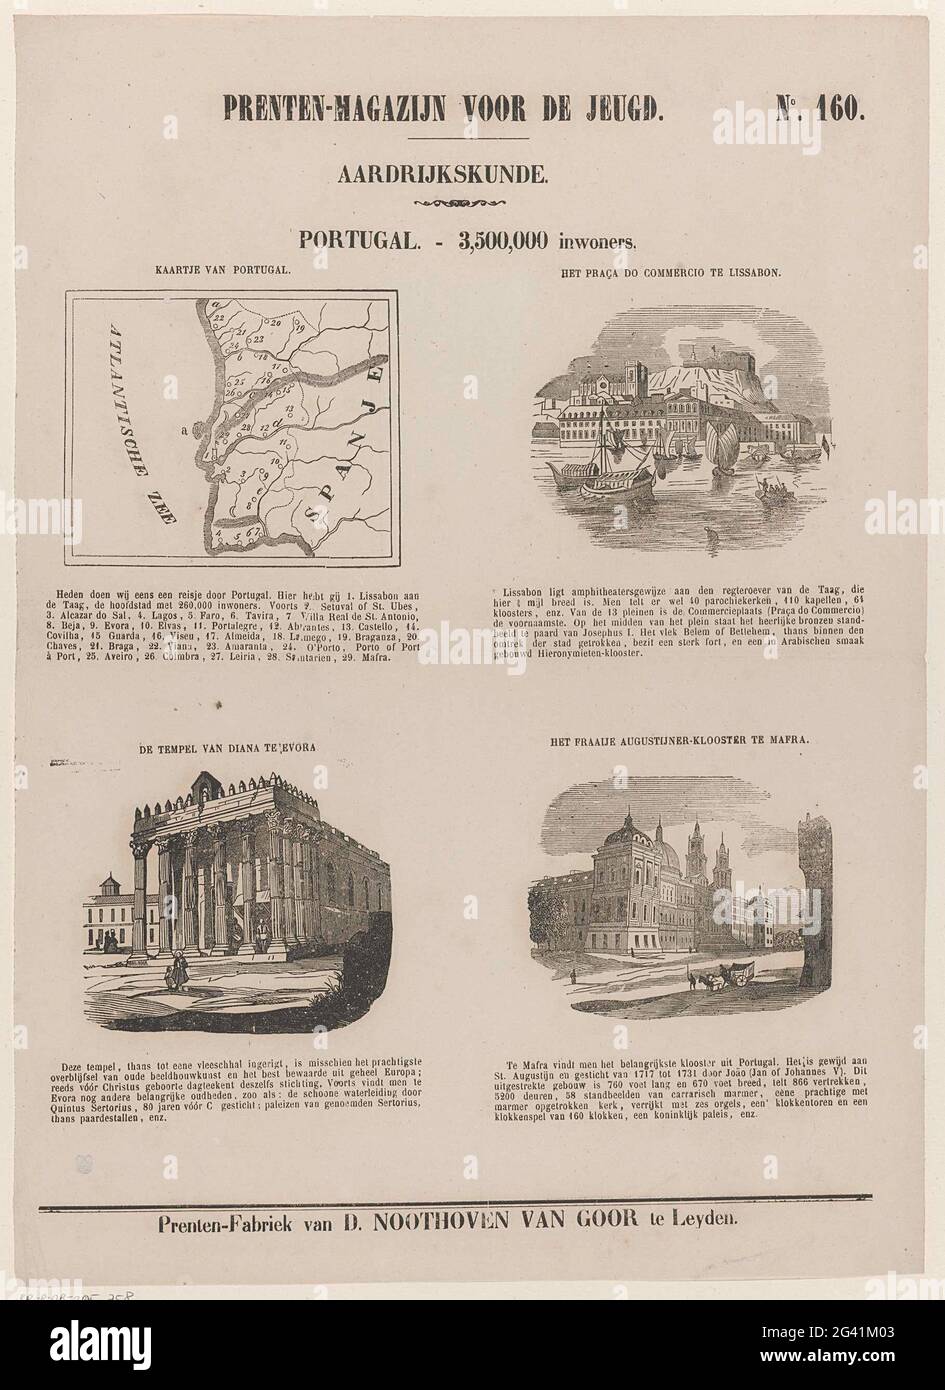 Portugal. - 3,500,000 inhabitants; Print warehouse for the youth; Geography. Sheet with 4 shows about Portugal with a map and important buildings: the Praça do Comércio in Lisbon, the Roman temple in Évora and the Palace of Mafra. Above every show a title and under every performance a caption. Numbered at the top right: No. 160. Stock Photo